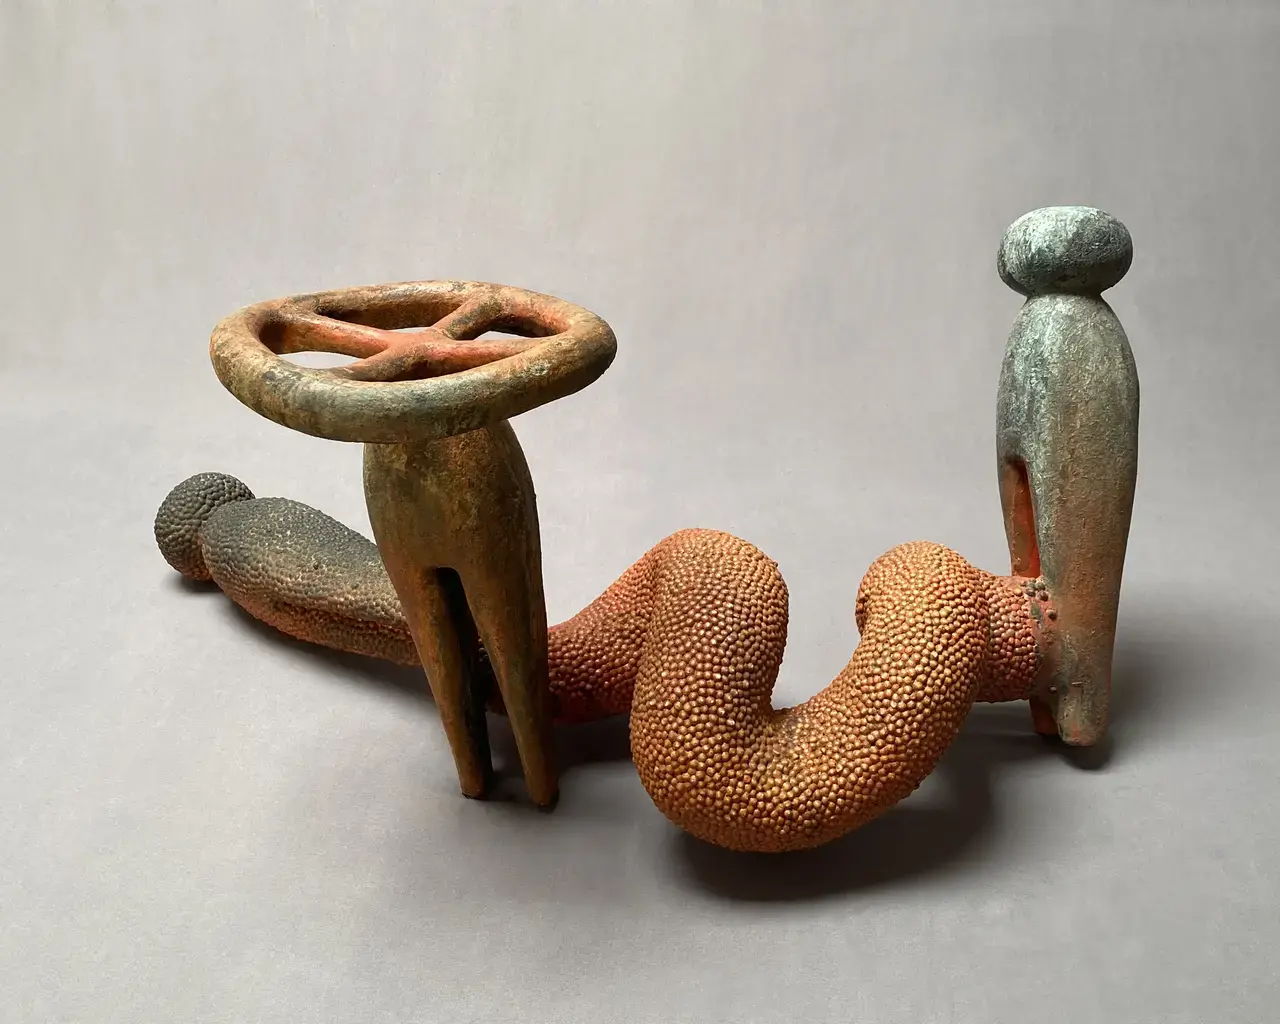 Pew Fellow Syd Carpenter, 3 Mother Pins on a Vine, 2021; Clay, mixed media, 18" x 37" x 26". Photo courtesy of the artist.&nbsp;